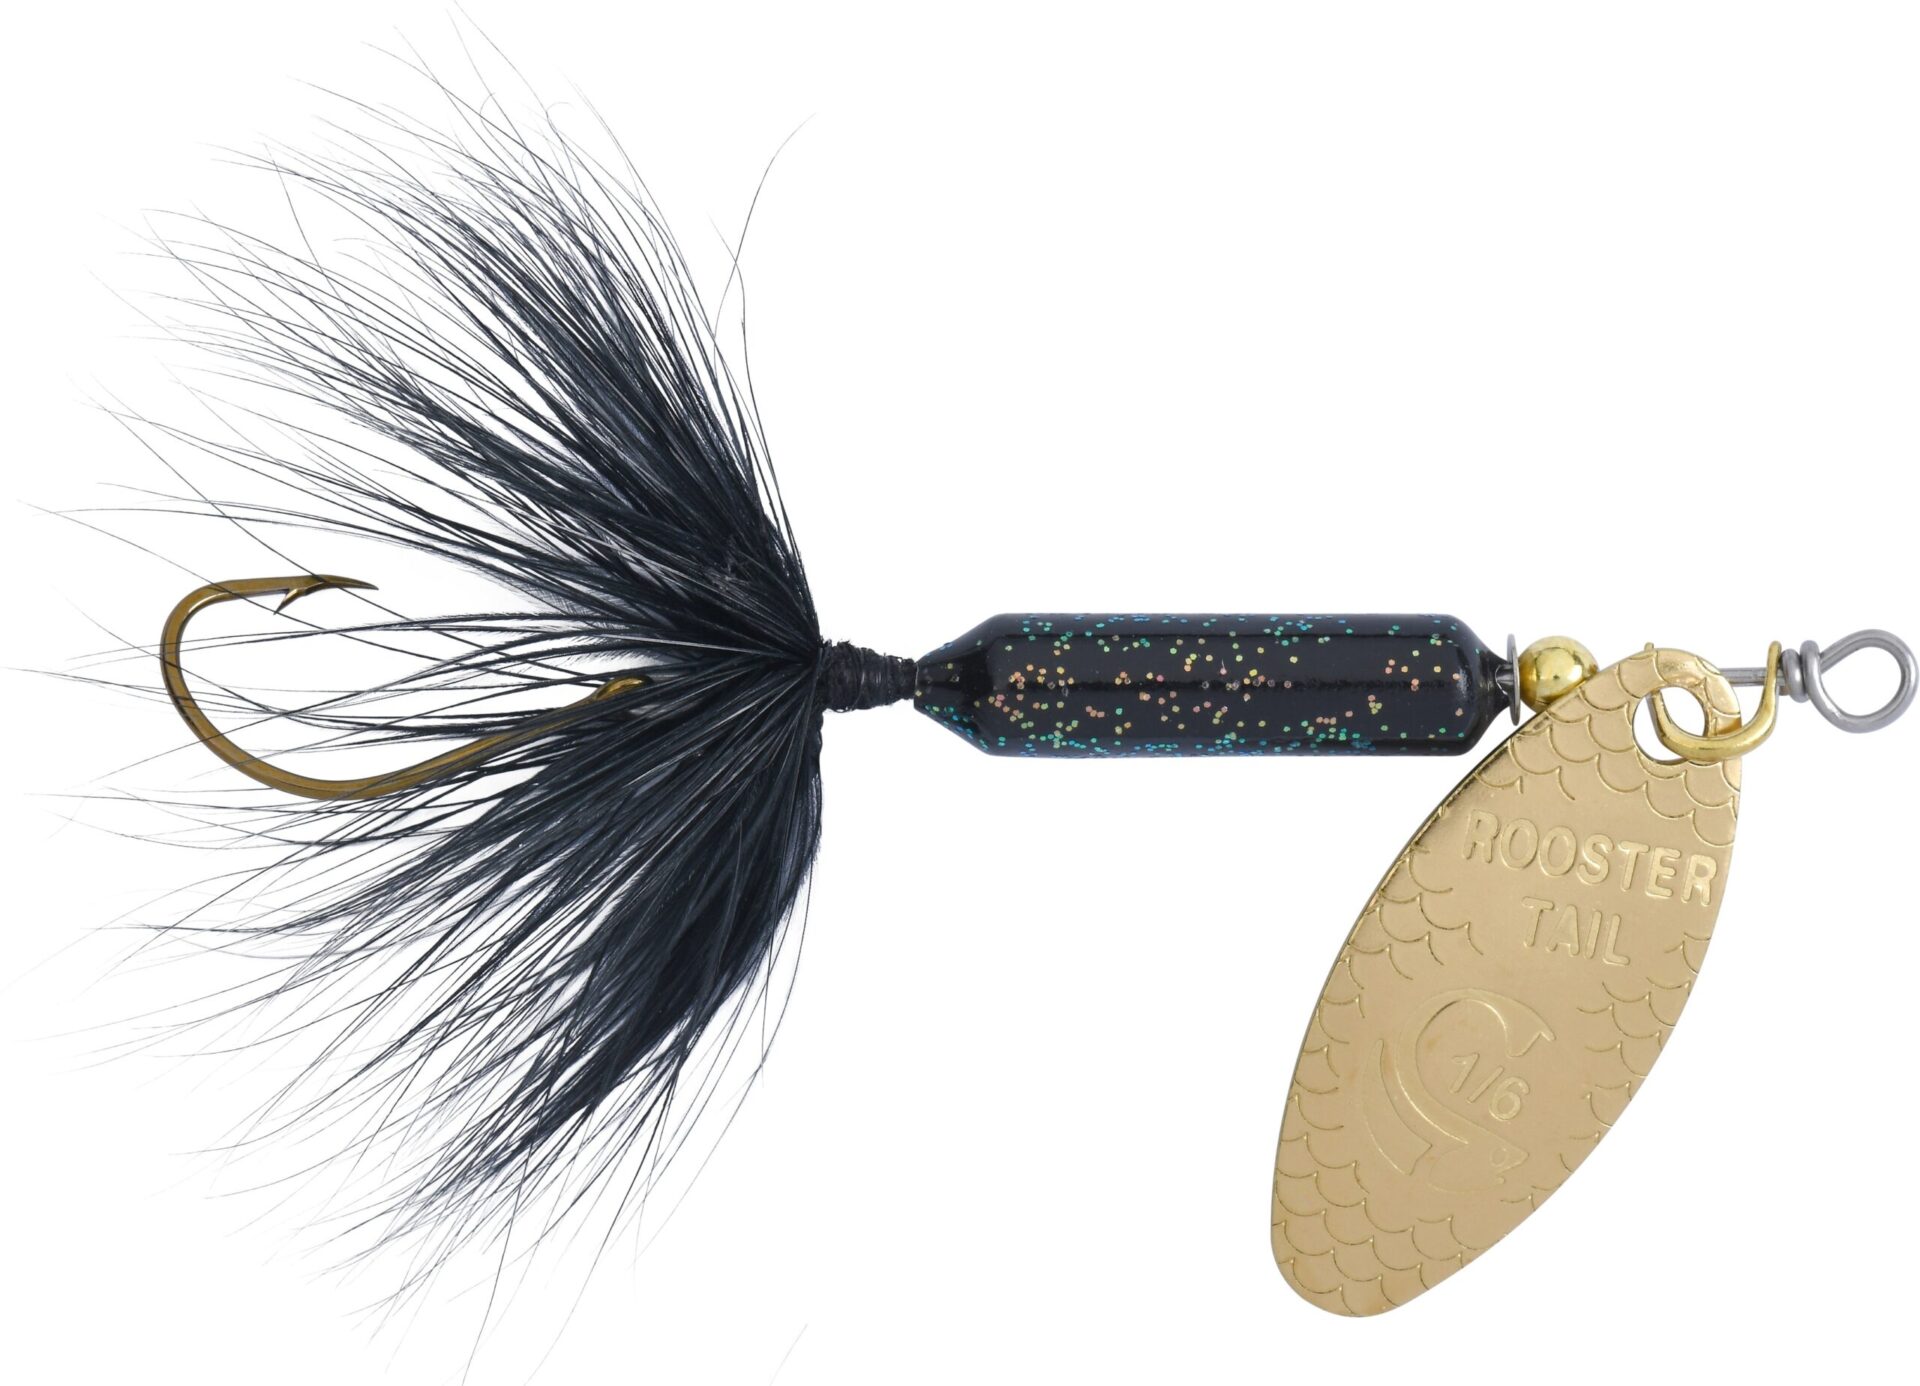 https://www.yakimabait.com/wp-content/uploads/2019/10/products-ROOSTER_TAIL_SINGLE_HOOK_GBL-01-scaled.jpg